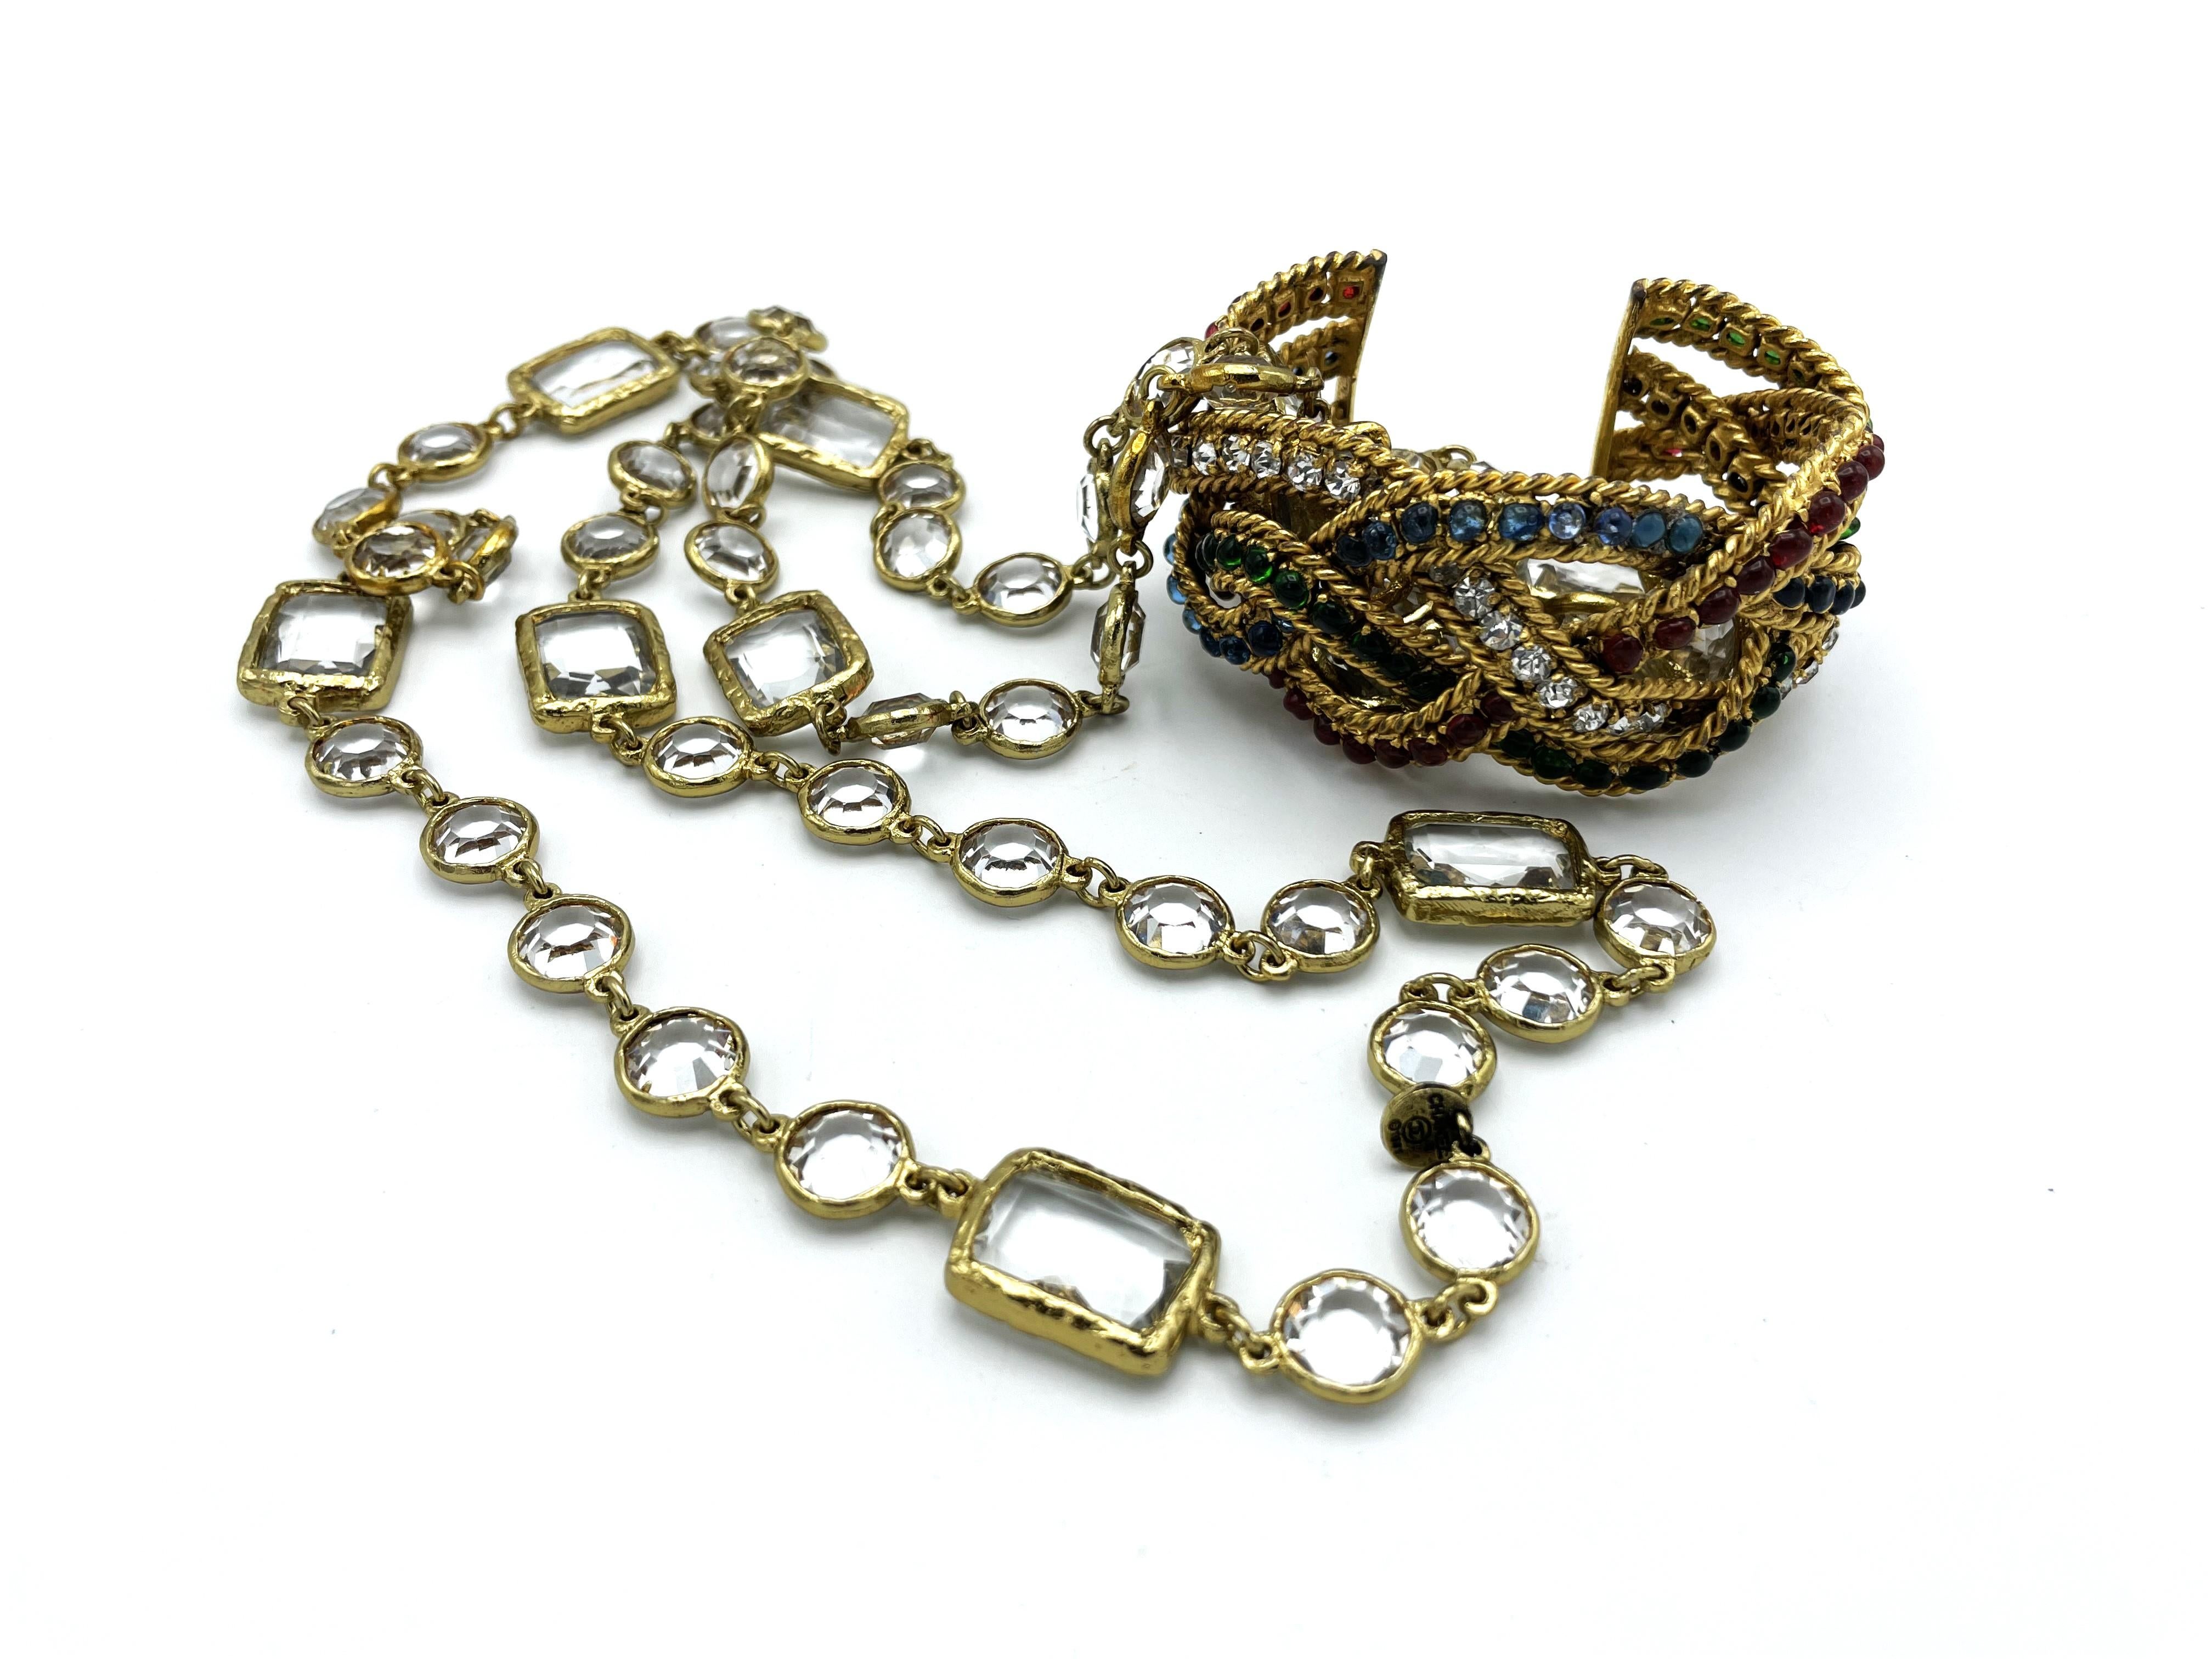 Vintage CHANEL Necklace/Sautoir with 12 clear Chicklets, signed 1981, gold plate 8